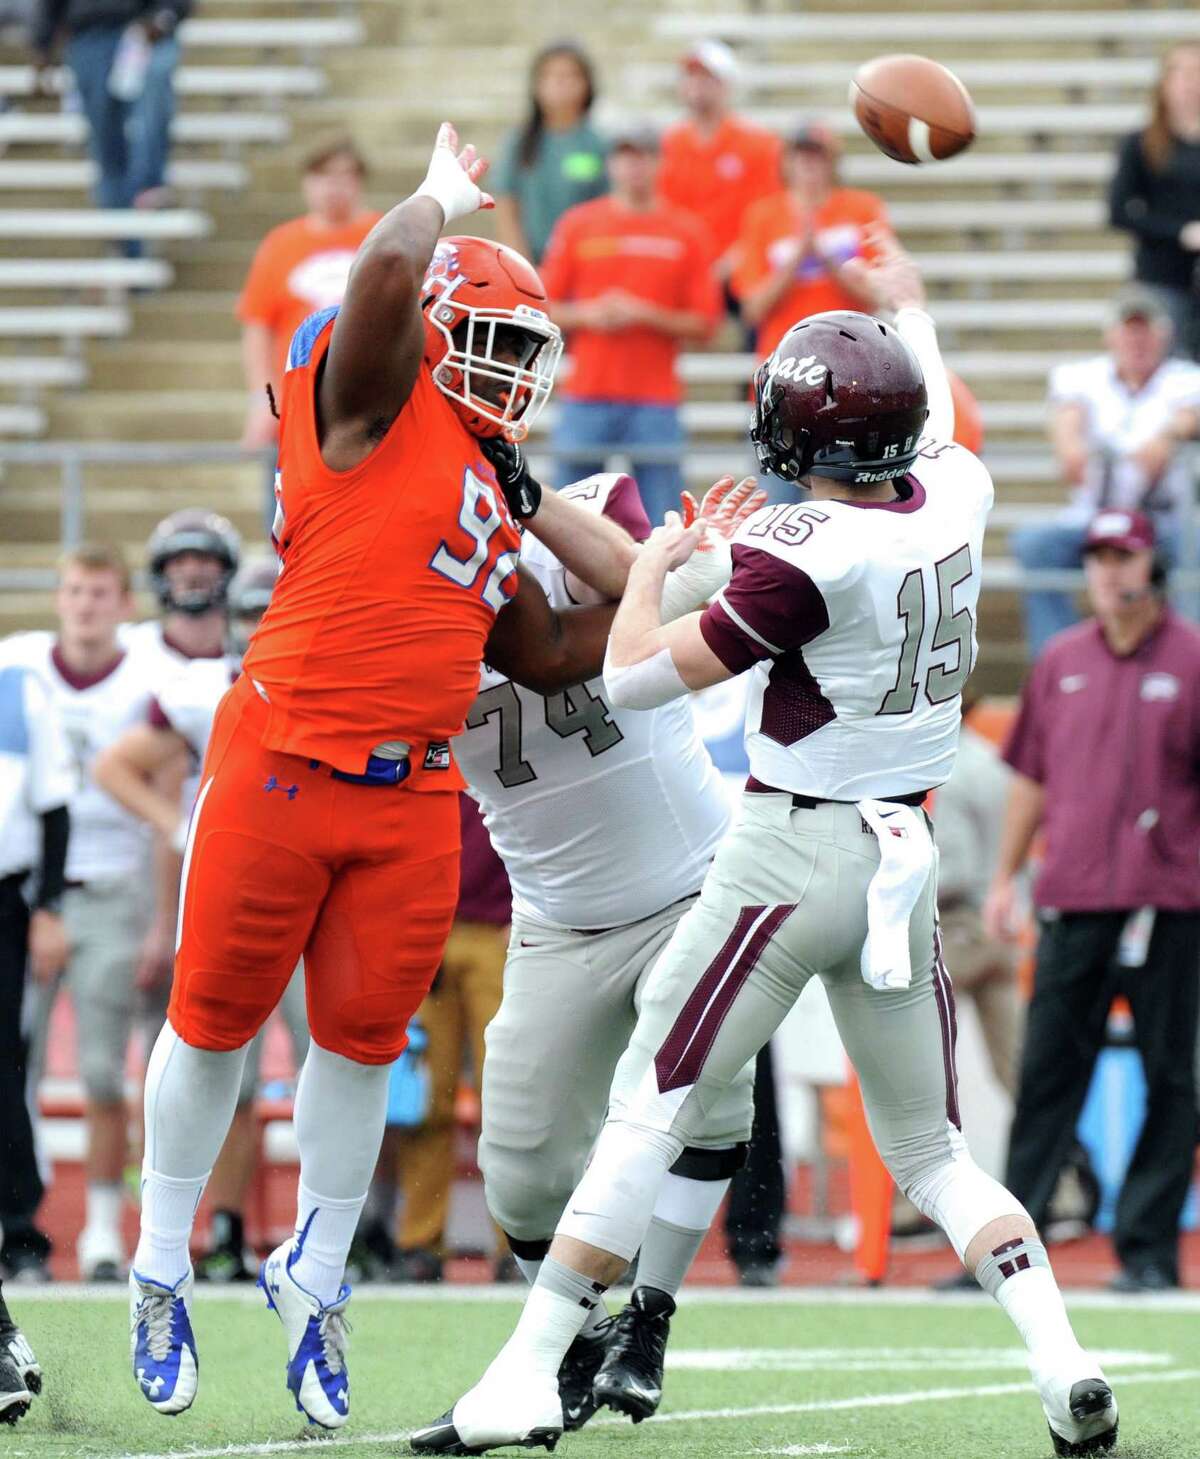 Sam Houston State DE P.J. Hall (92) is tied for 5th in FCS play with 21 tackles for loss, leading to him being awarded Southland Conference defensive player of the year.